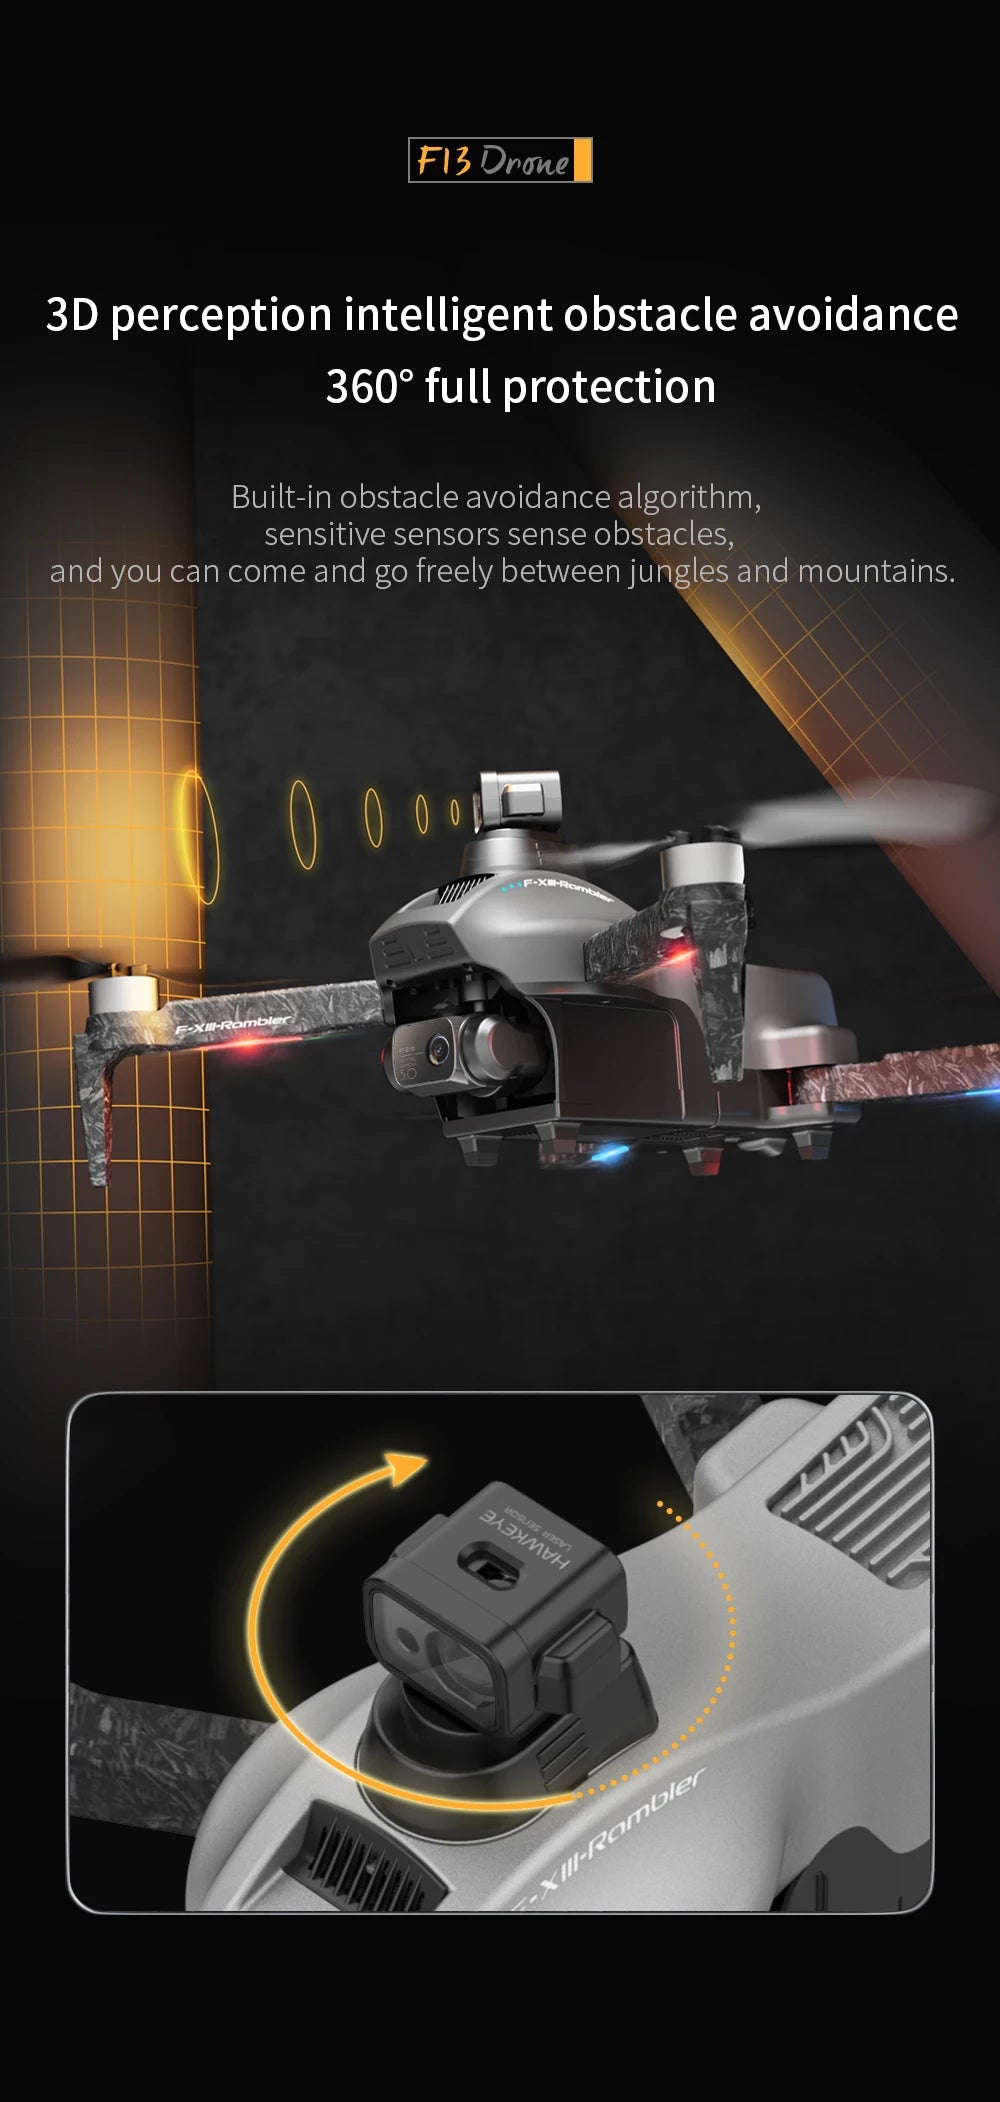 4DRC F13 - GPS Drone, F13 Drone 3D perception intelligent obstacle avoidance 360' full